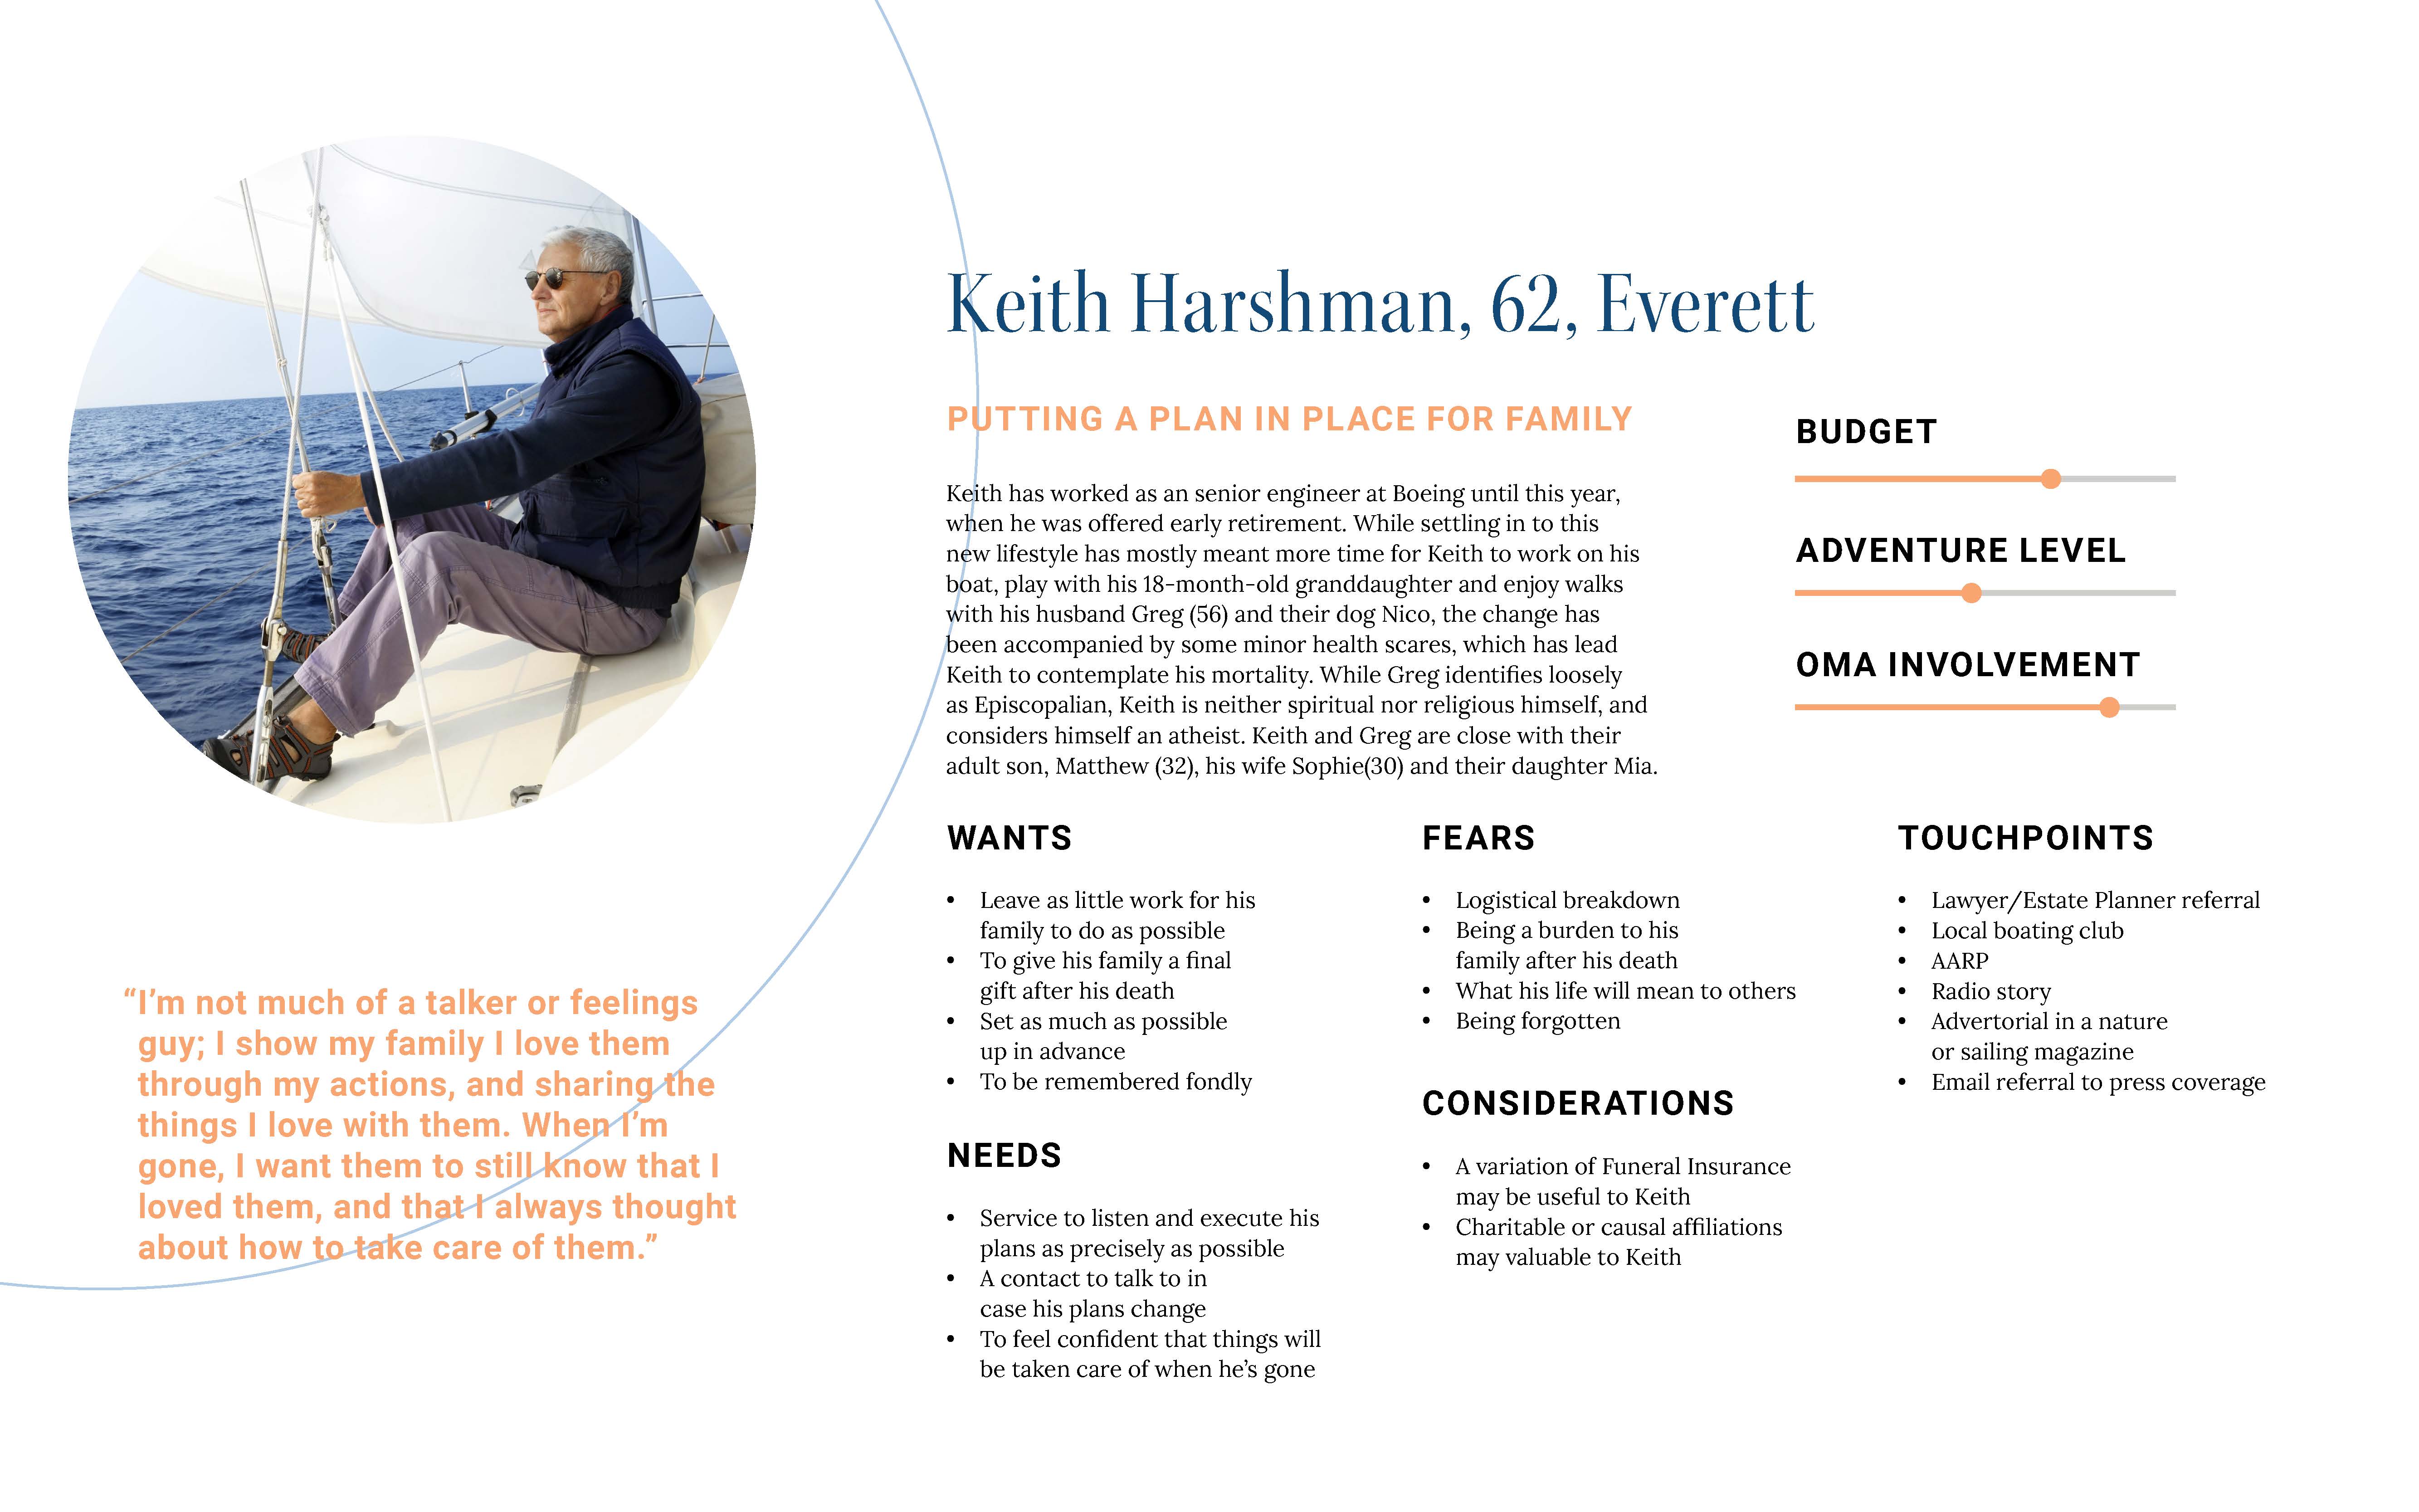 Persona for Keith Harshman; seeking to put a plan in place for his own memorial in order to spare his family suffering.